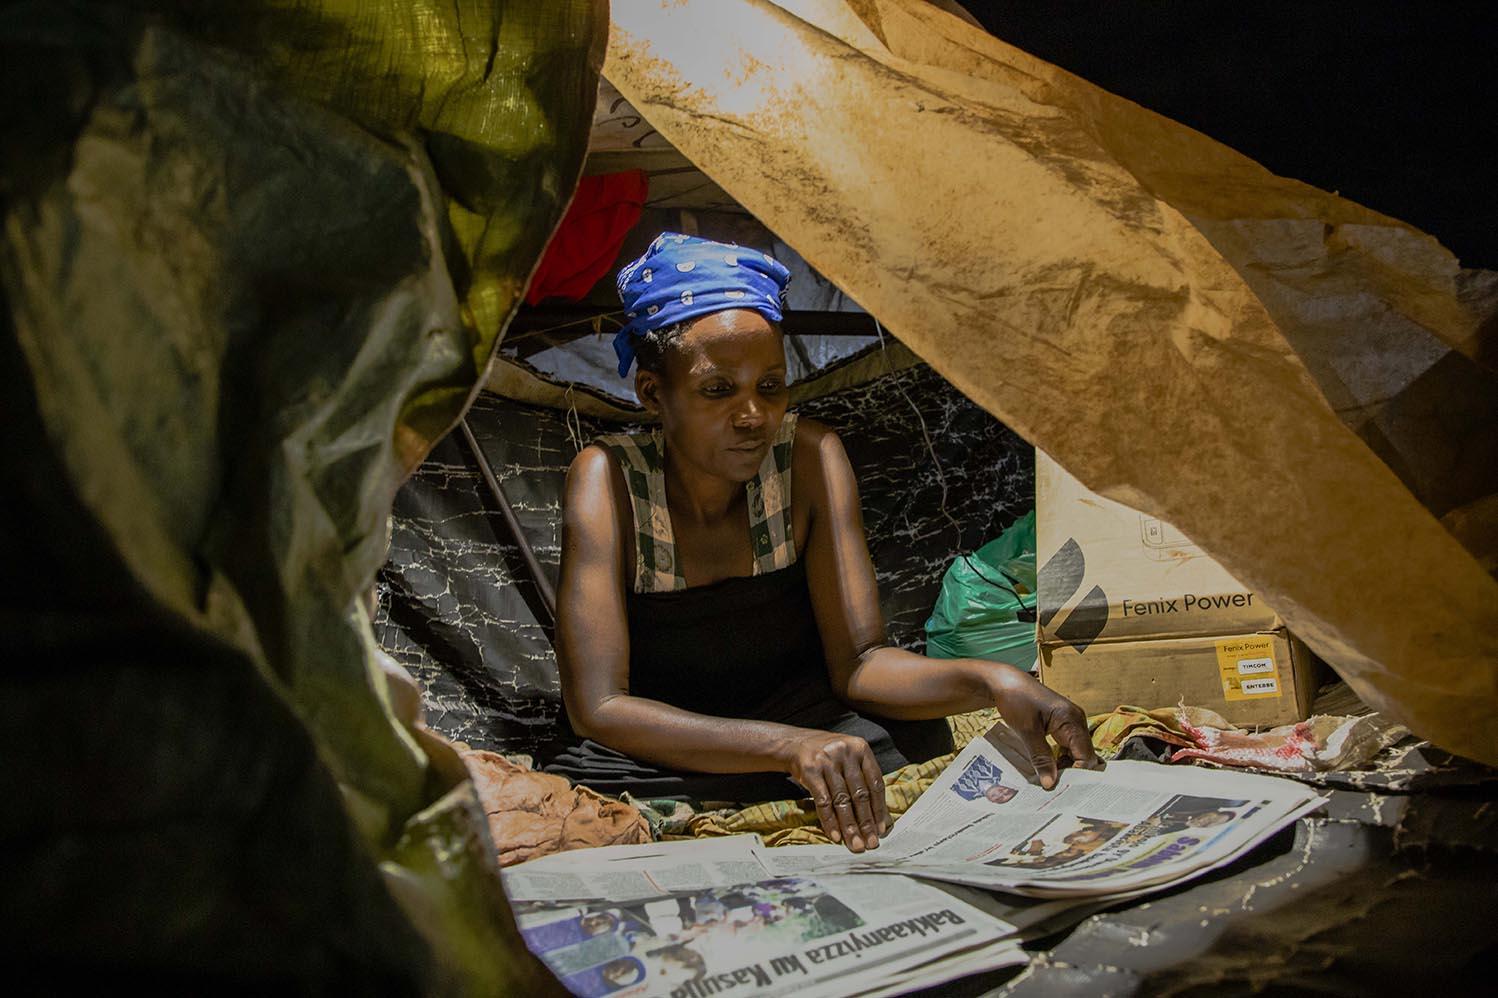 Gertrude (45), a Nakawa Market vendor, reads a newspaper in a self-made tent where she spends her nights on 9 April 2020. She decided to stay at the market and sell vegetables so she can continue sending money to her five children back at home.